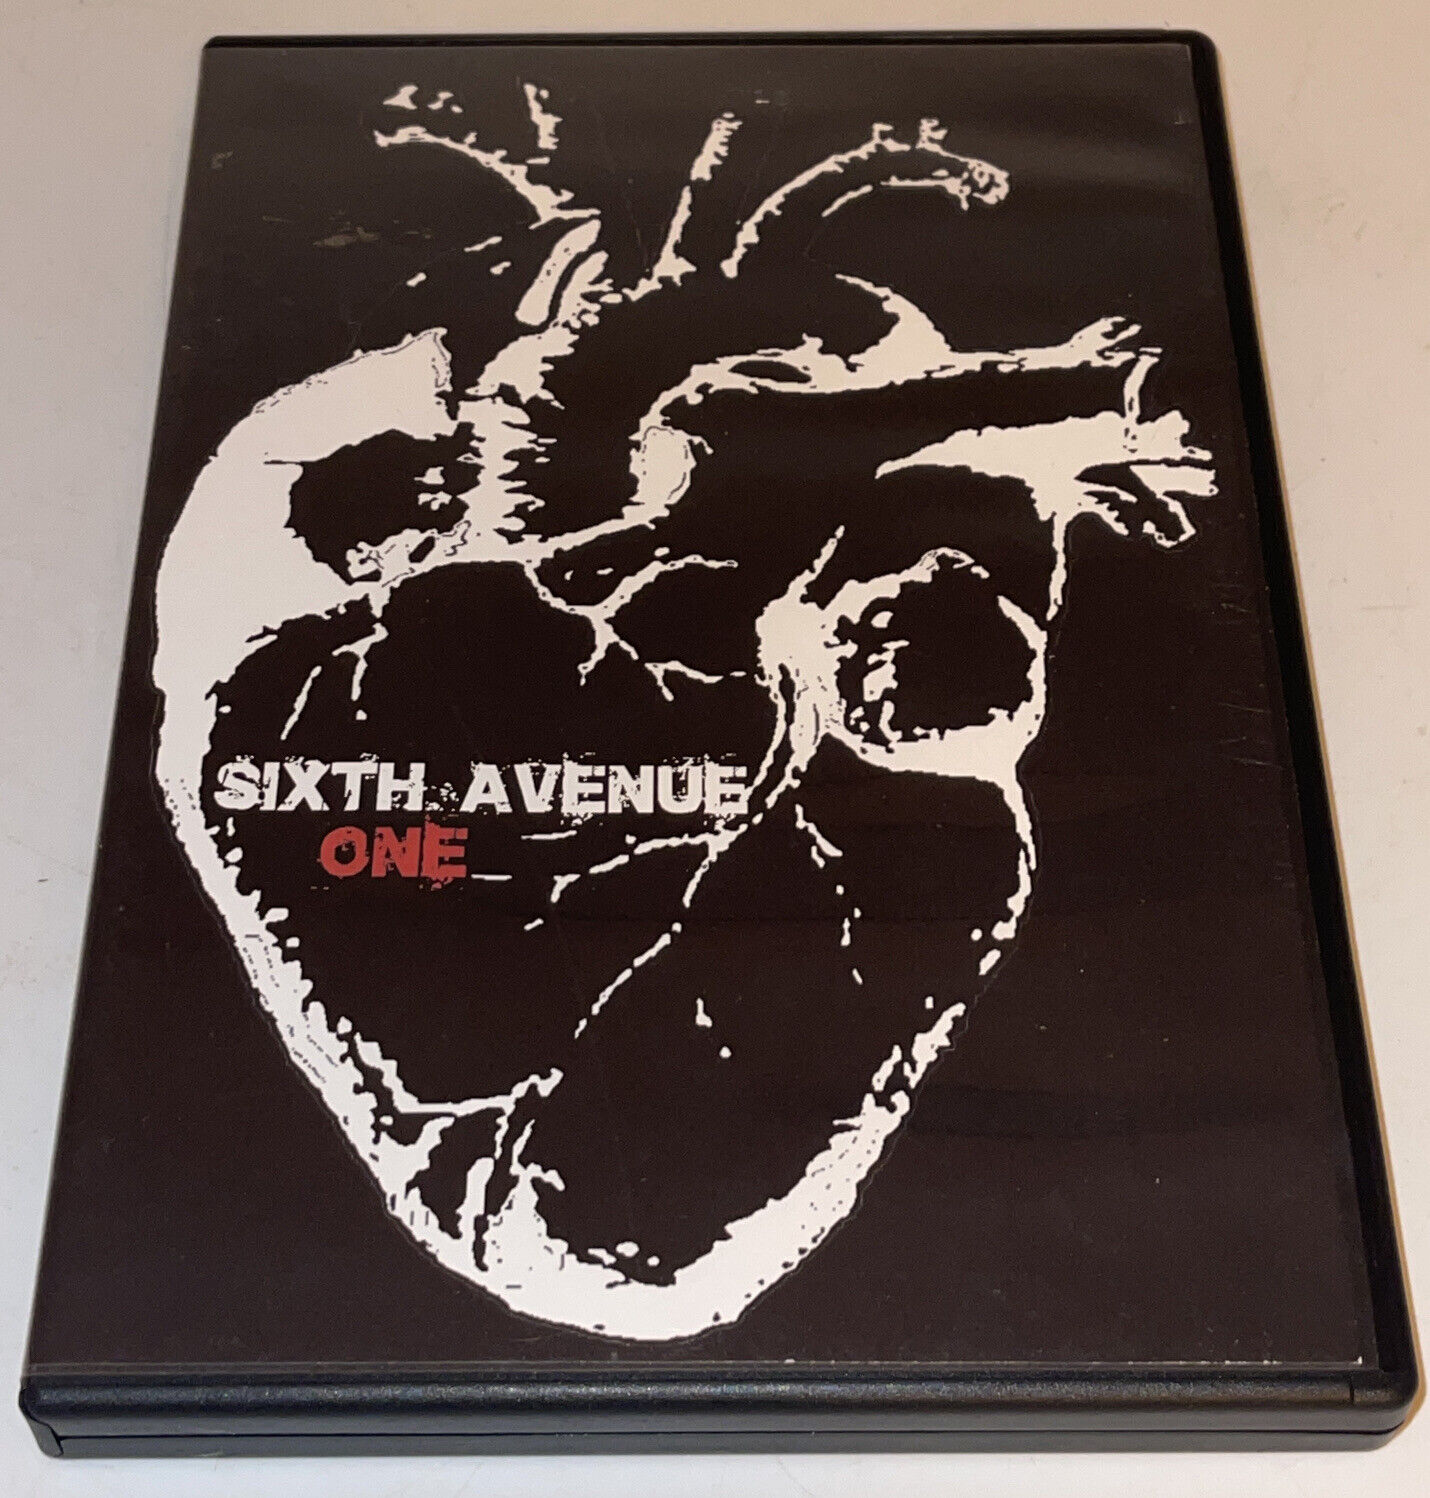 Sixth Avenue Skate Park - One (DVD) Mike Vallely, Corey Martinez